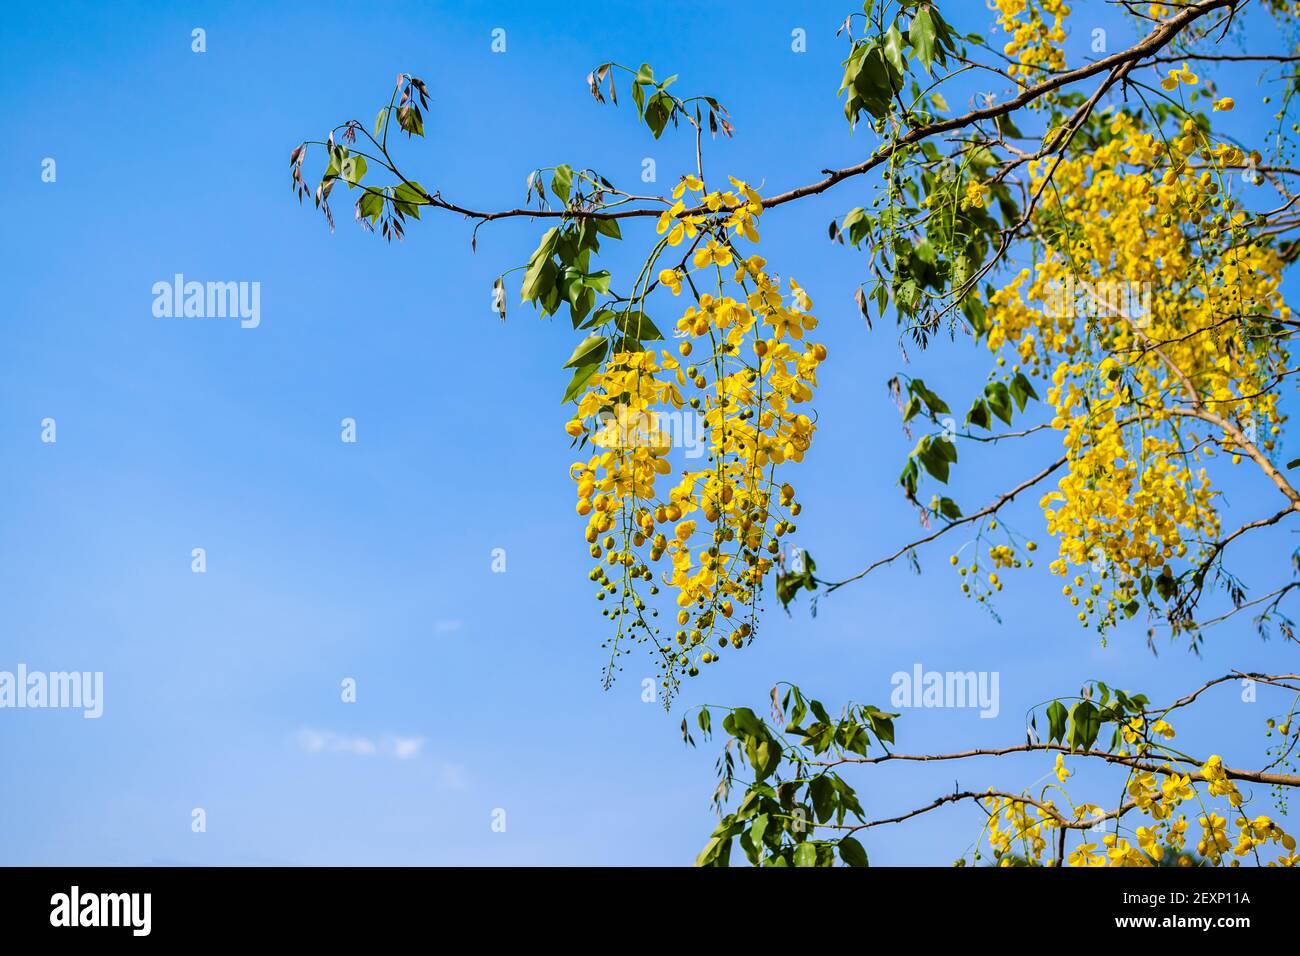 Golden shower tree yellow colored flowers bloom hanging on tree branch. Copy space with selective focus used and blue sky background. Stock Photo